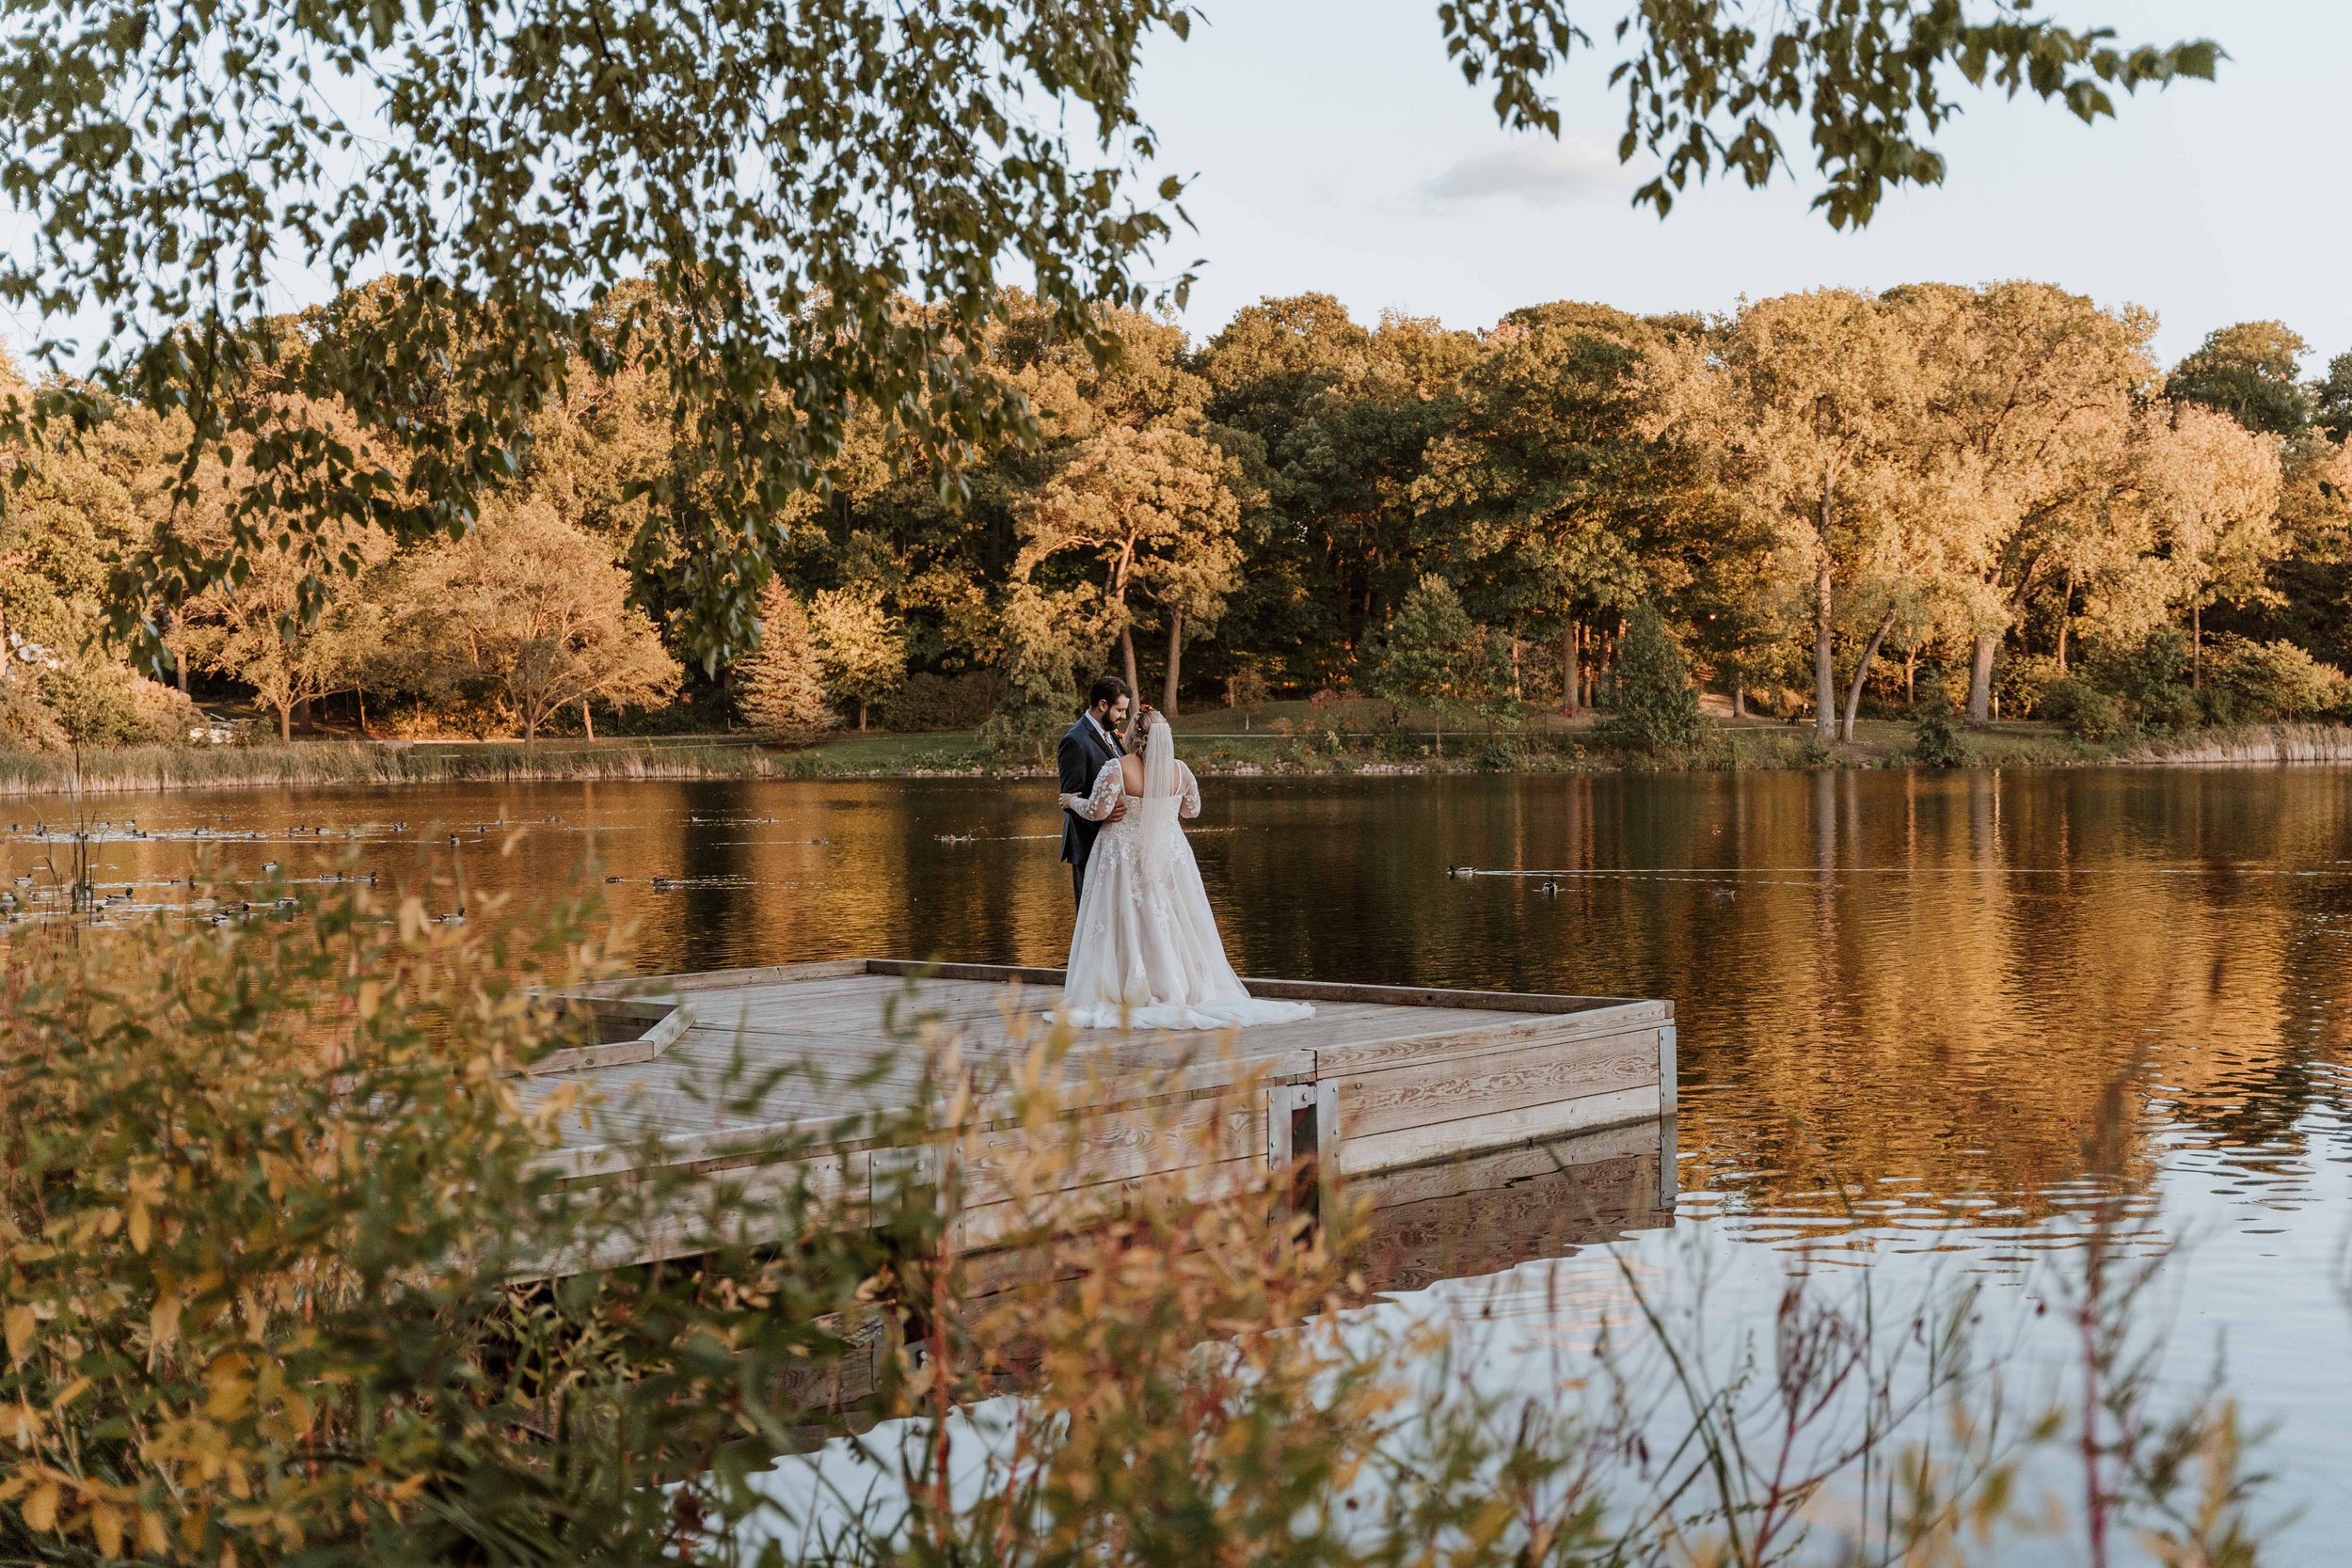 Couple share first dance together on a wooden dock on the lake